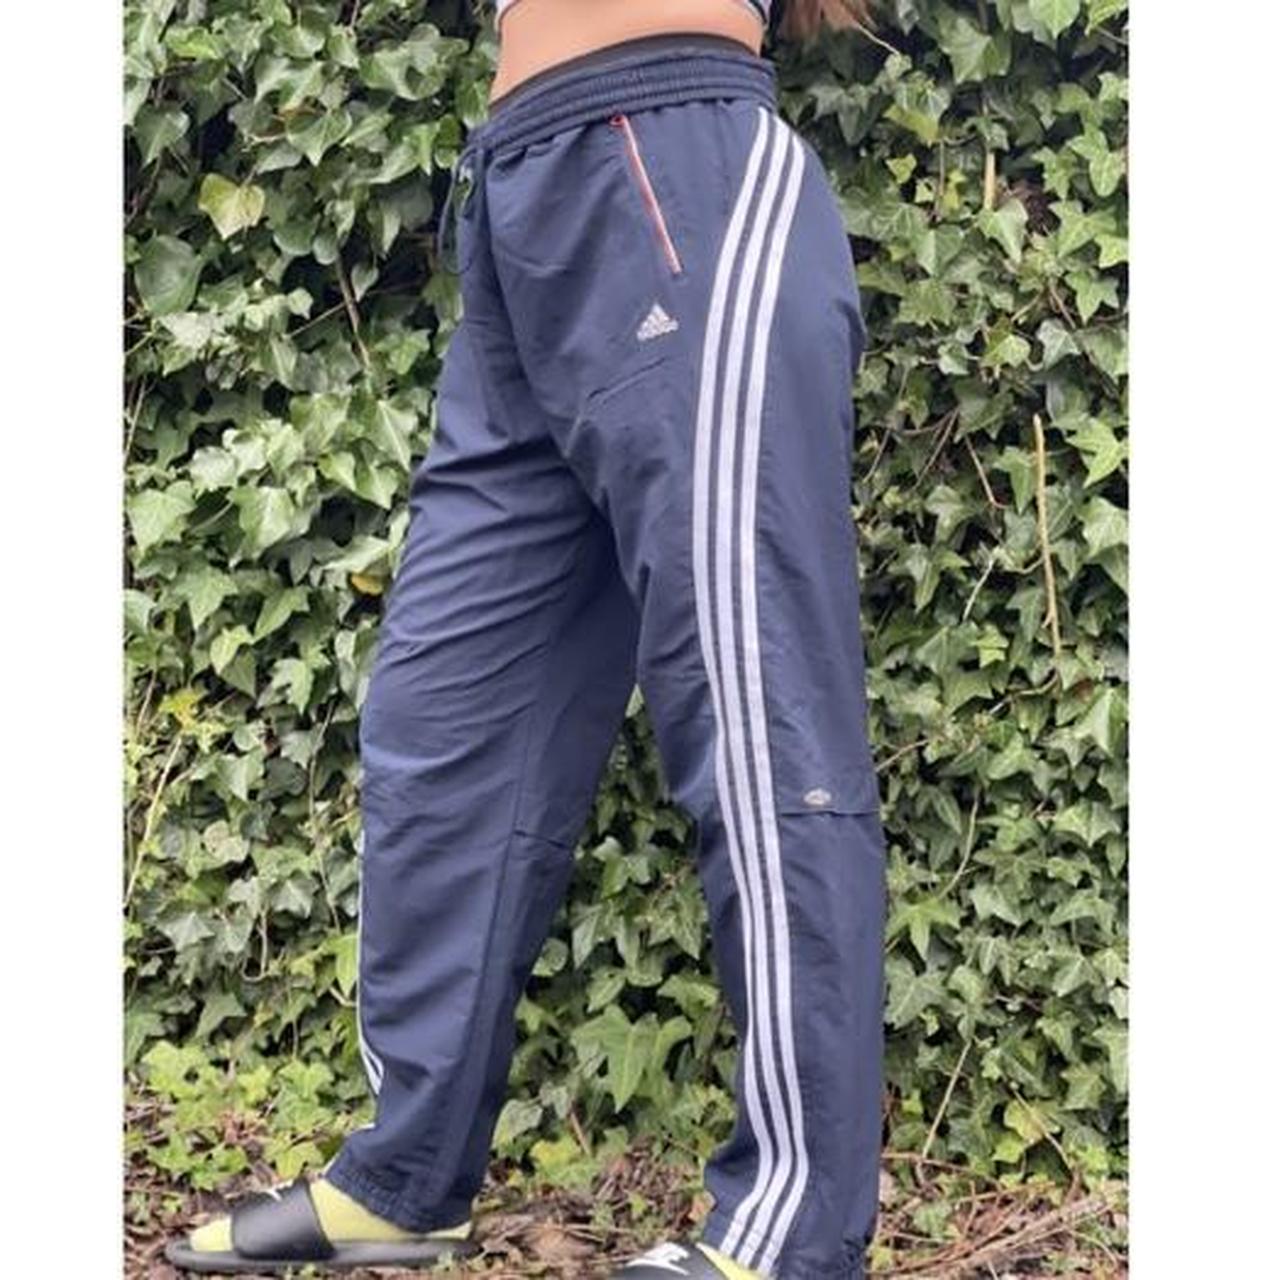 Adidas climacool workout pants with zips on the - Depop